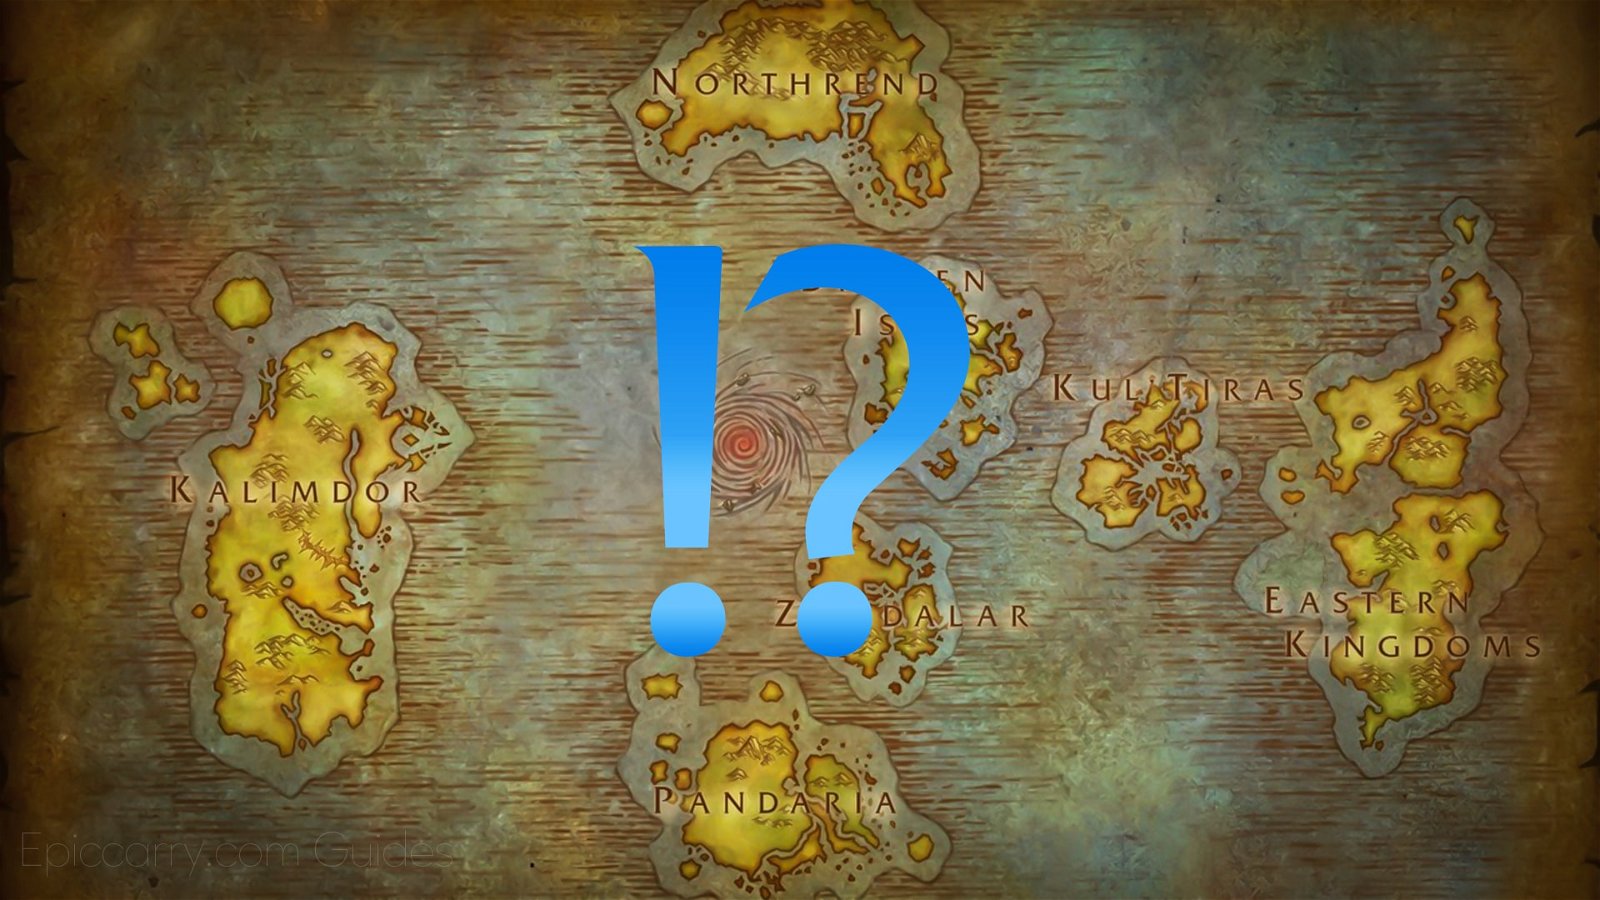 Daily And World Quests In Bfa Wow: How To Unlock